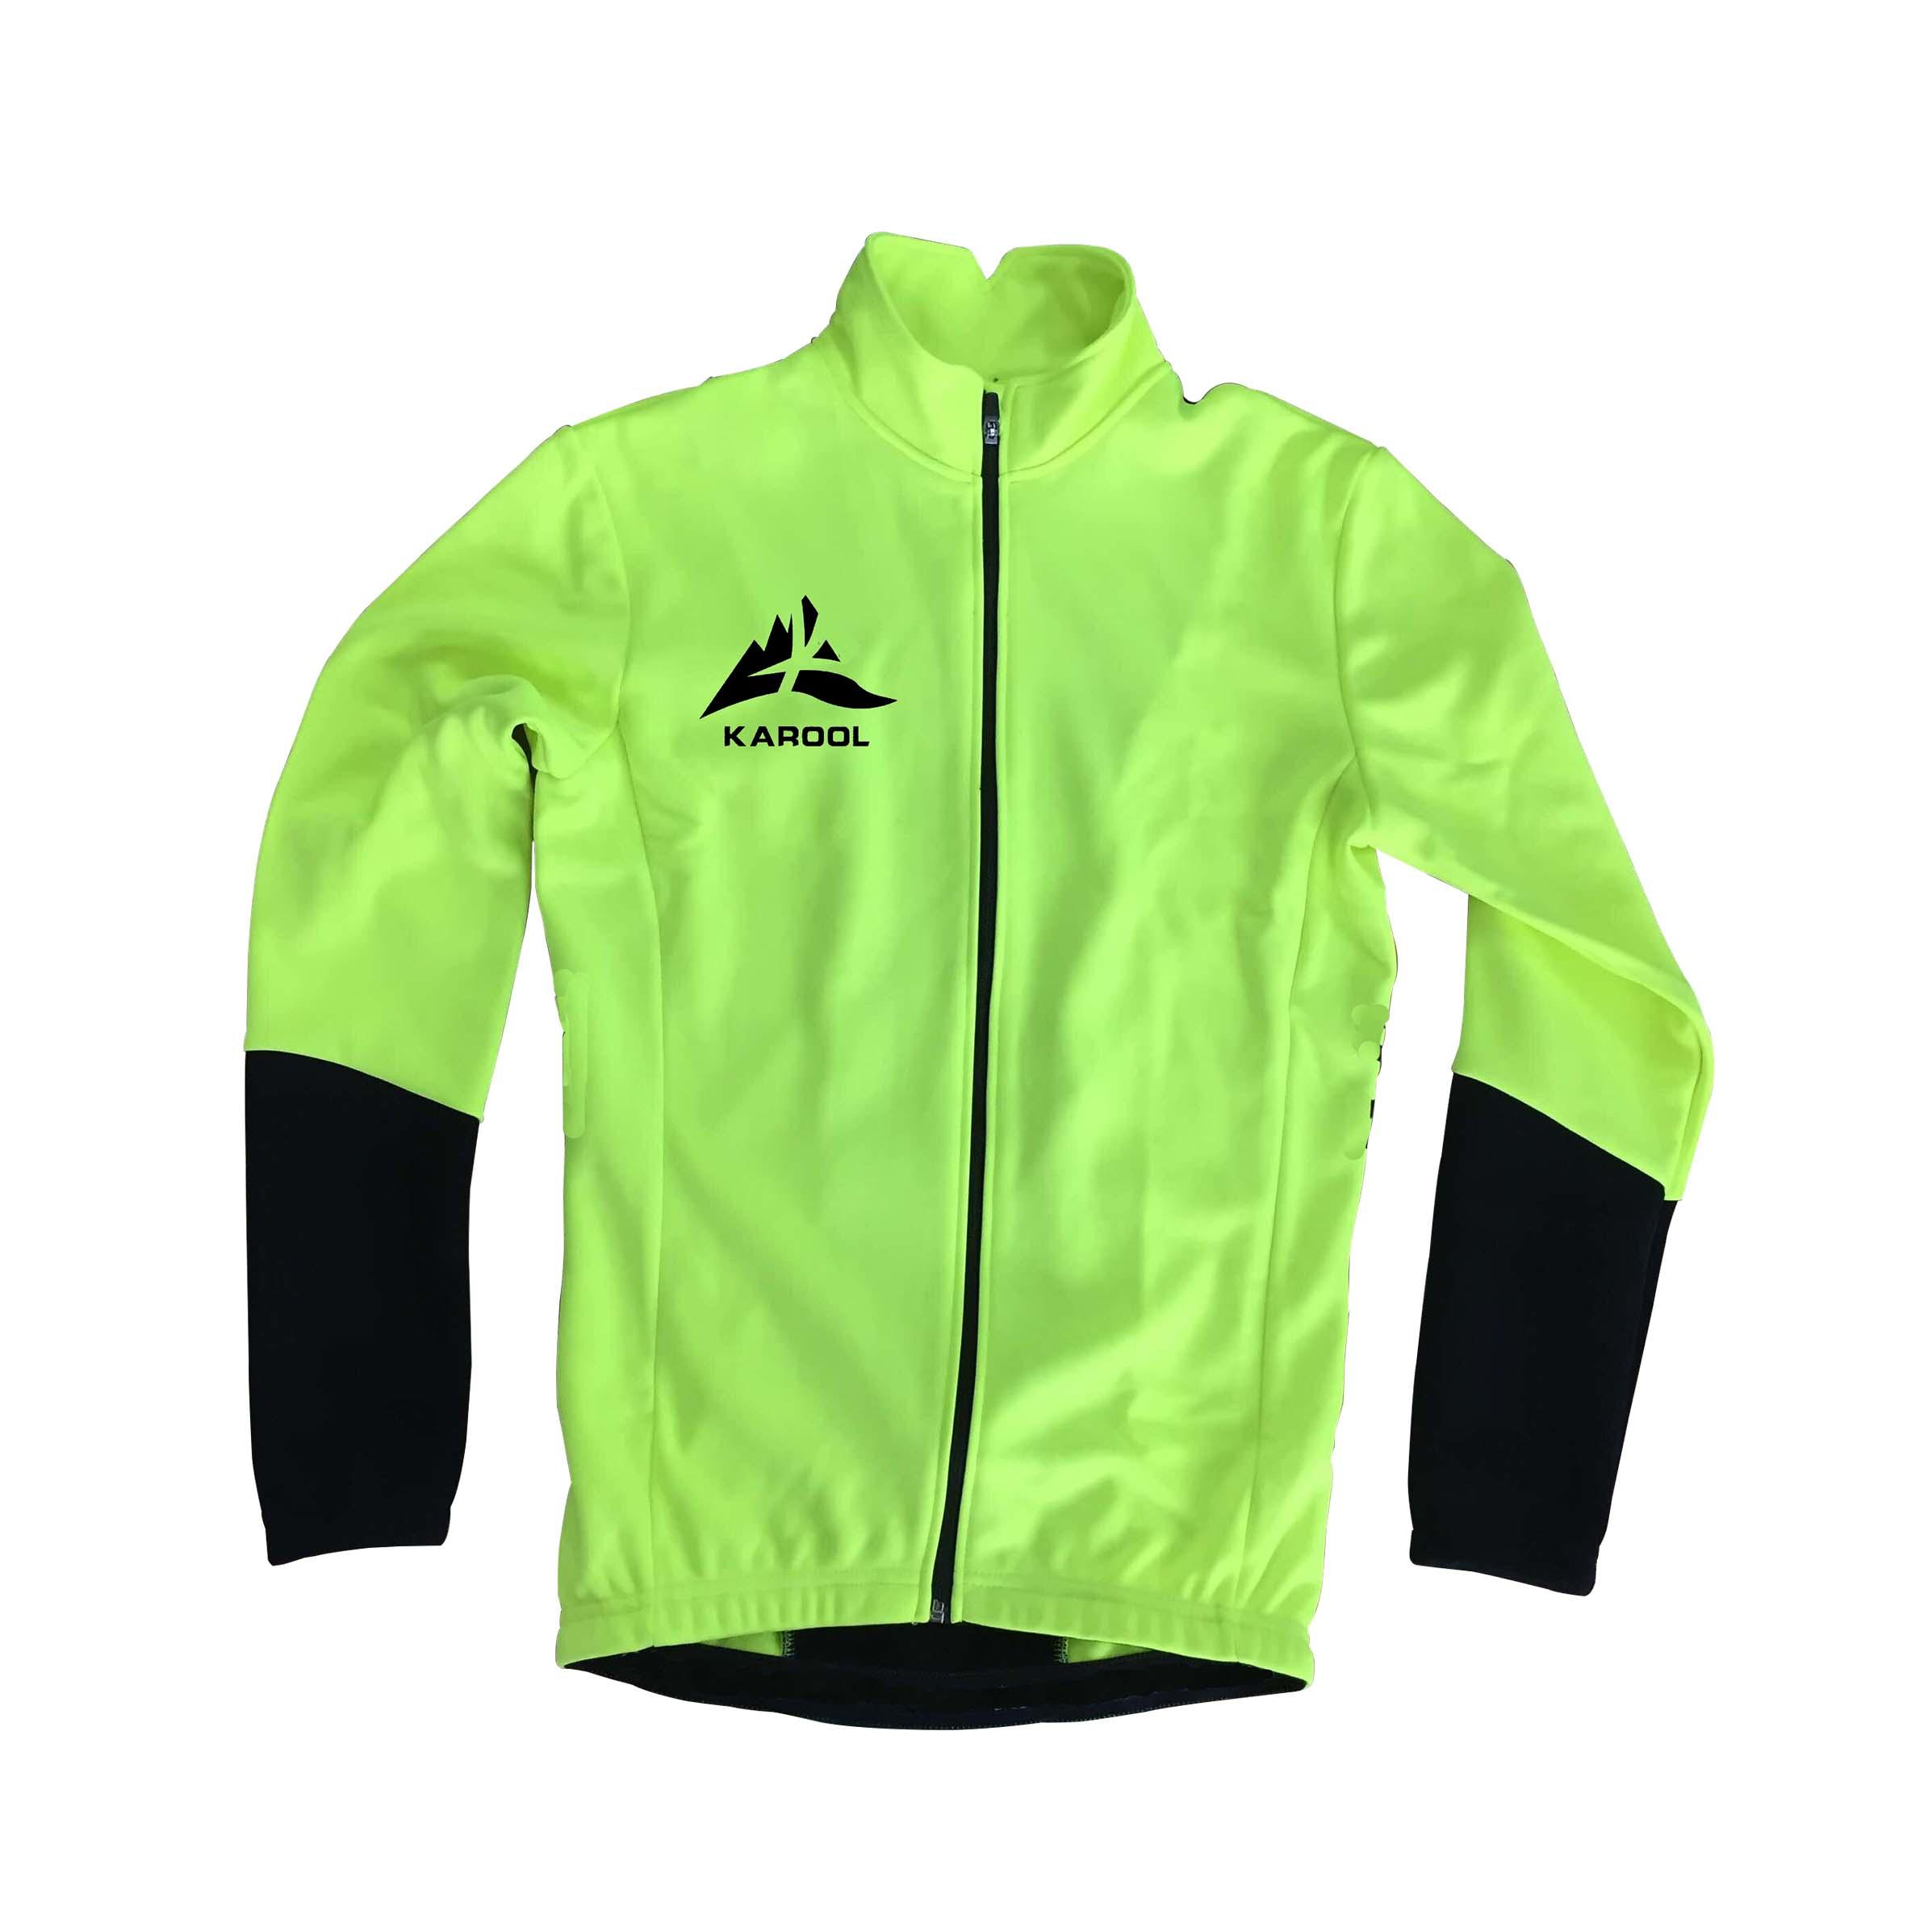 Karool bike riding jackets with good price for children-1